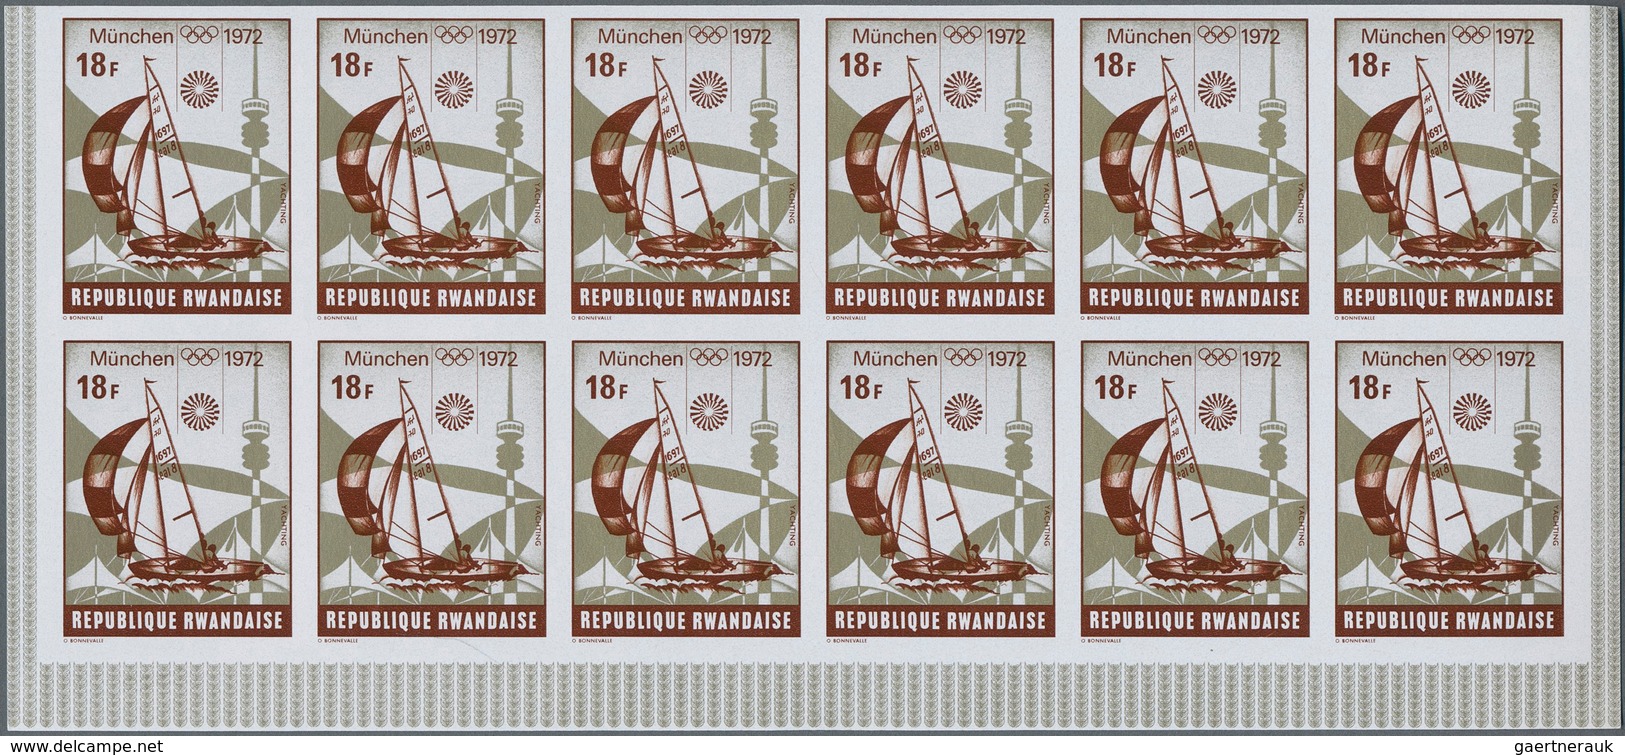 Ruanda: 1967/1975. Lot of 13,519 IMPERFORATE stamps, souvenir and miniature sheets showing various i